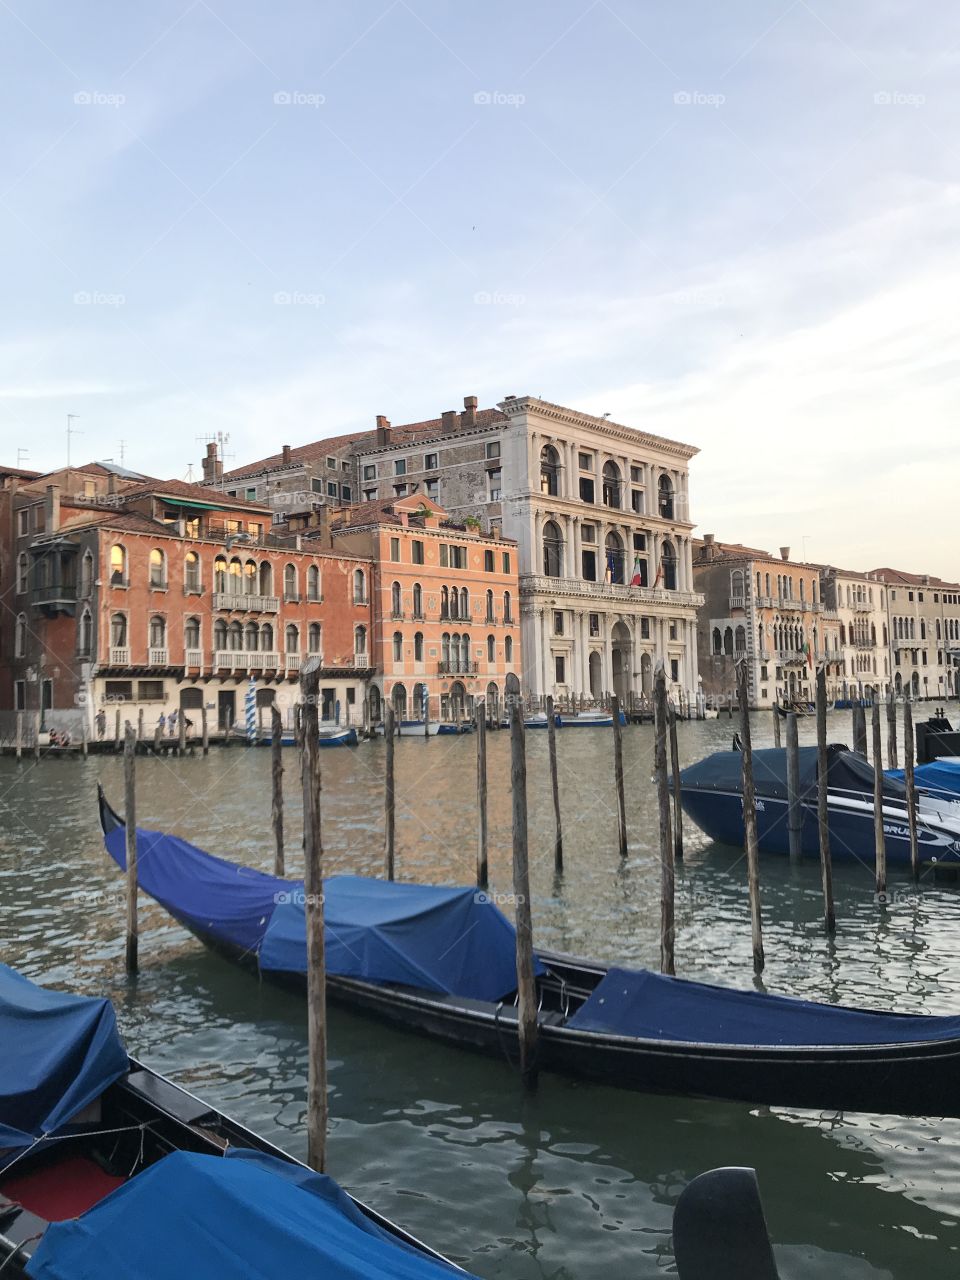 Parked boats in Venice